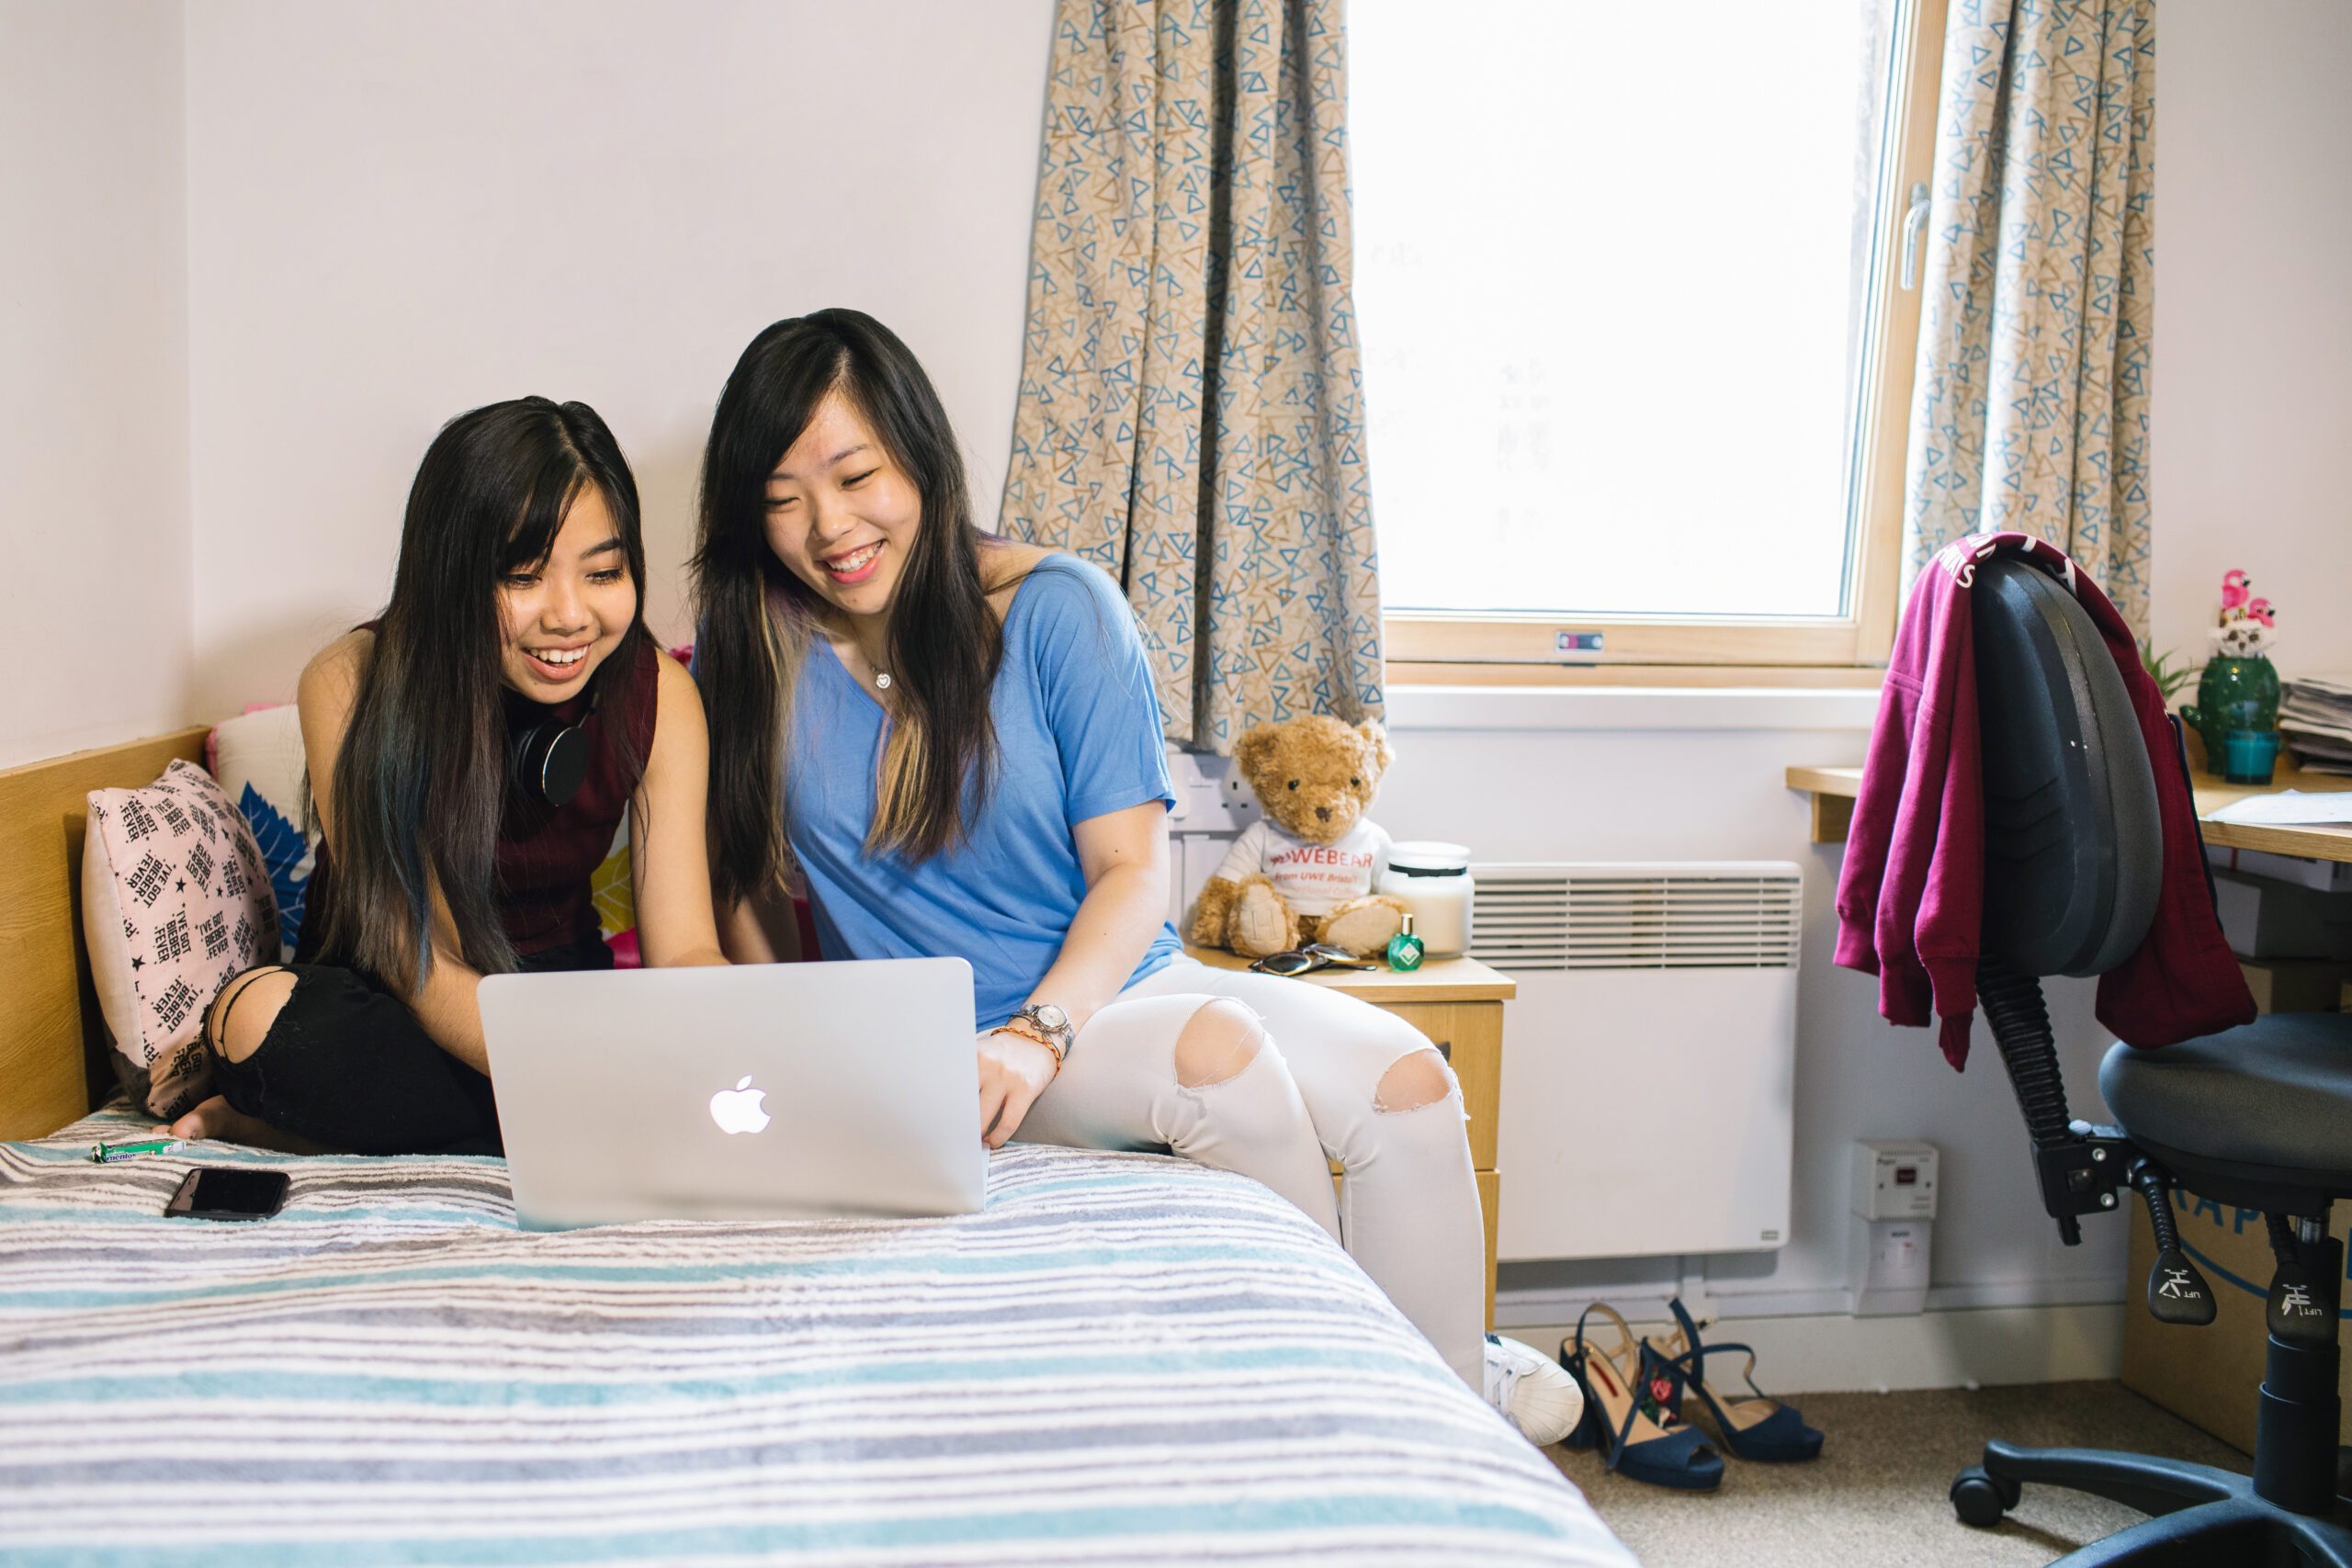 Two students sitting on a bed looking at a laptop